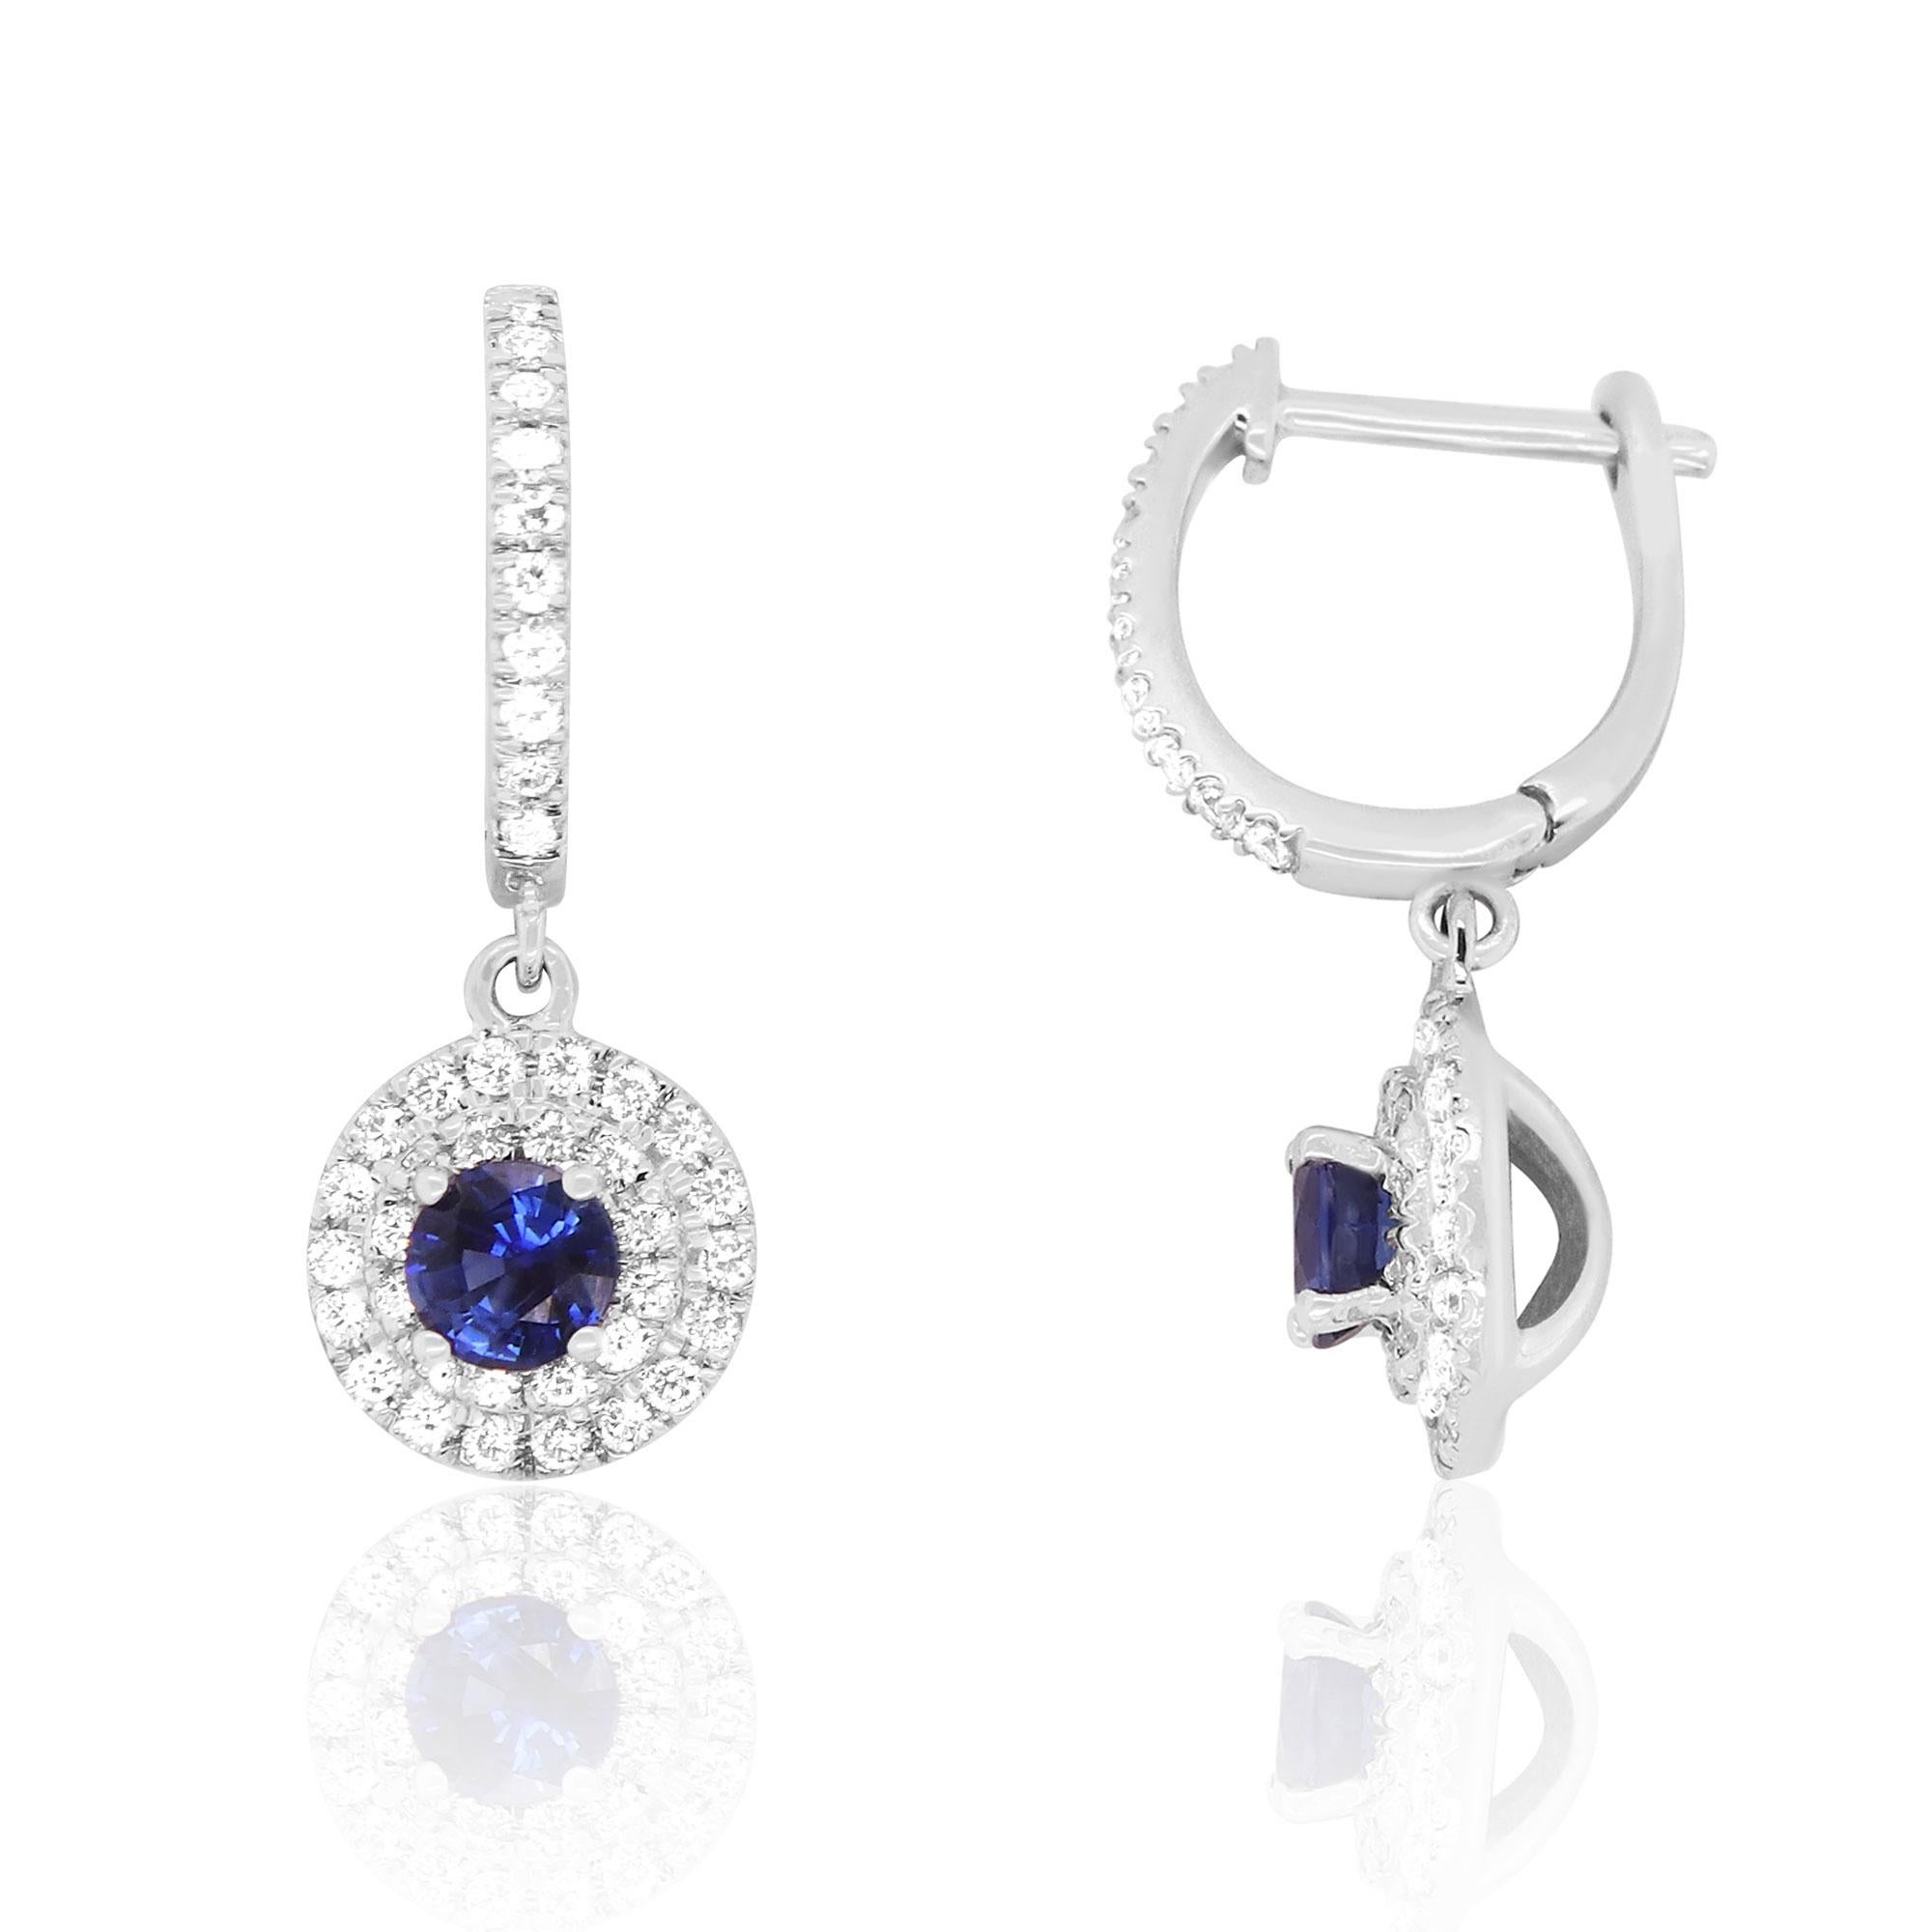 Material: 14k White Gold 
Stone Details: 2 Round Blue Sapphires at 1.16 Carats Total
80 Brilliant Round White Diamonds at 0.83 Carats- Clarity: SI / Color: H-I

Fine one-of-a-kind craftsmanship meets incredible quality in this breathtaking piece of